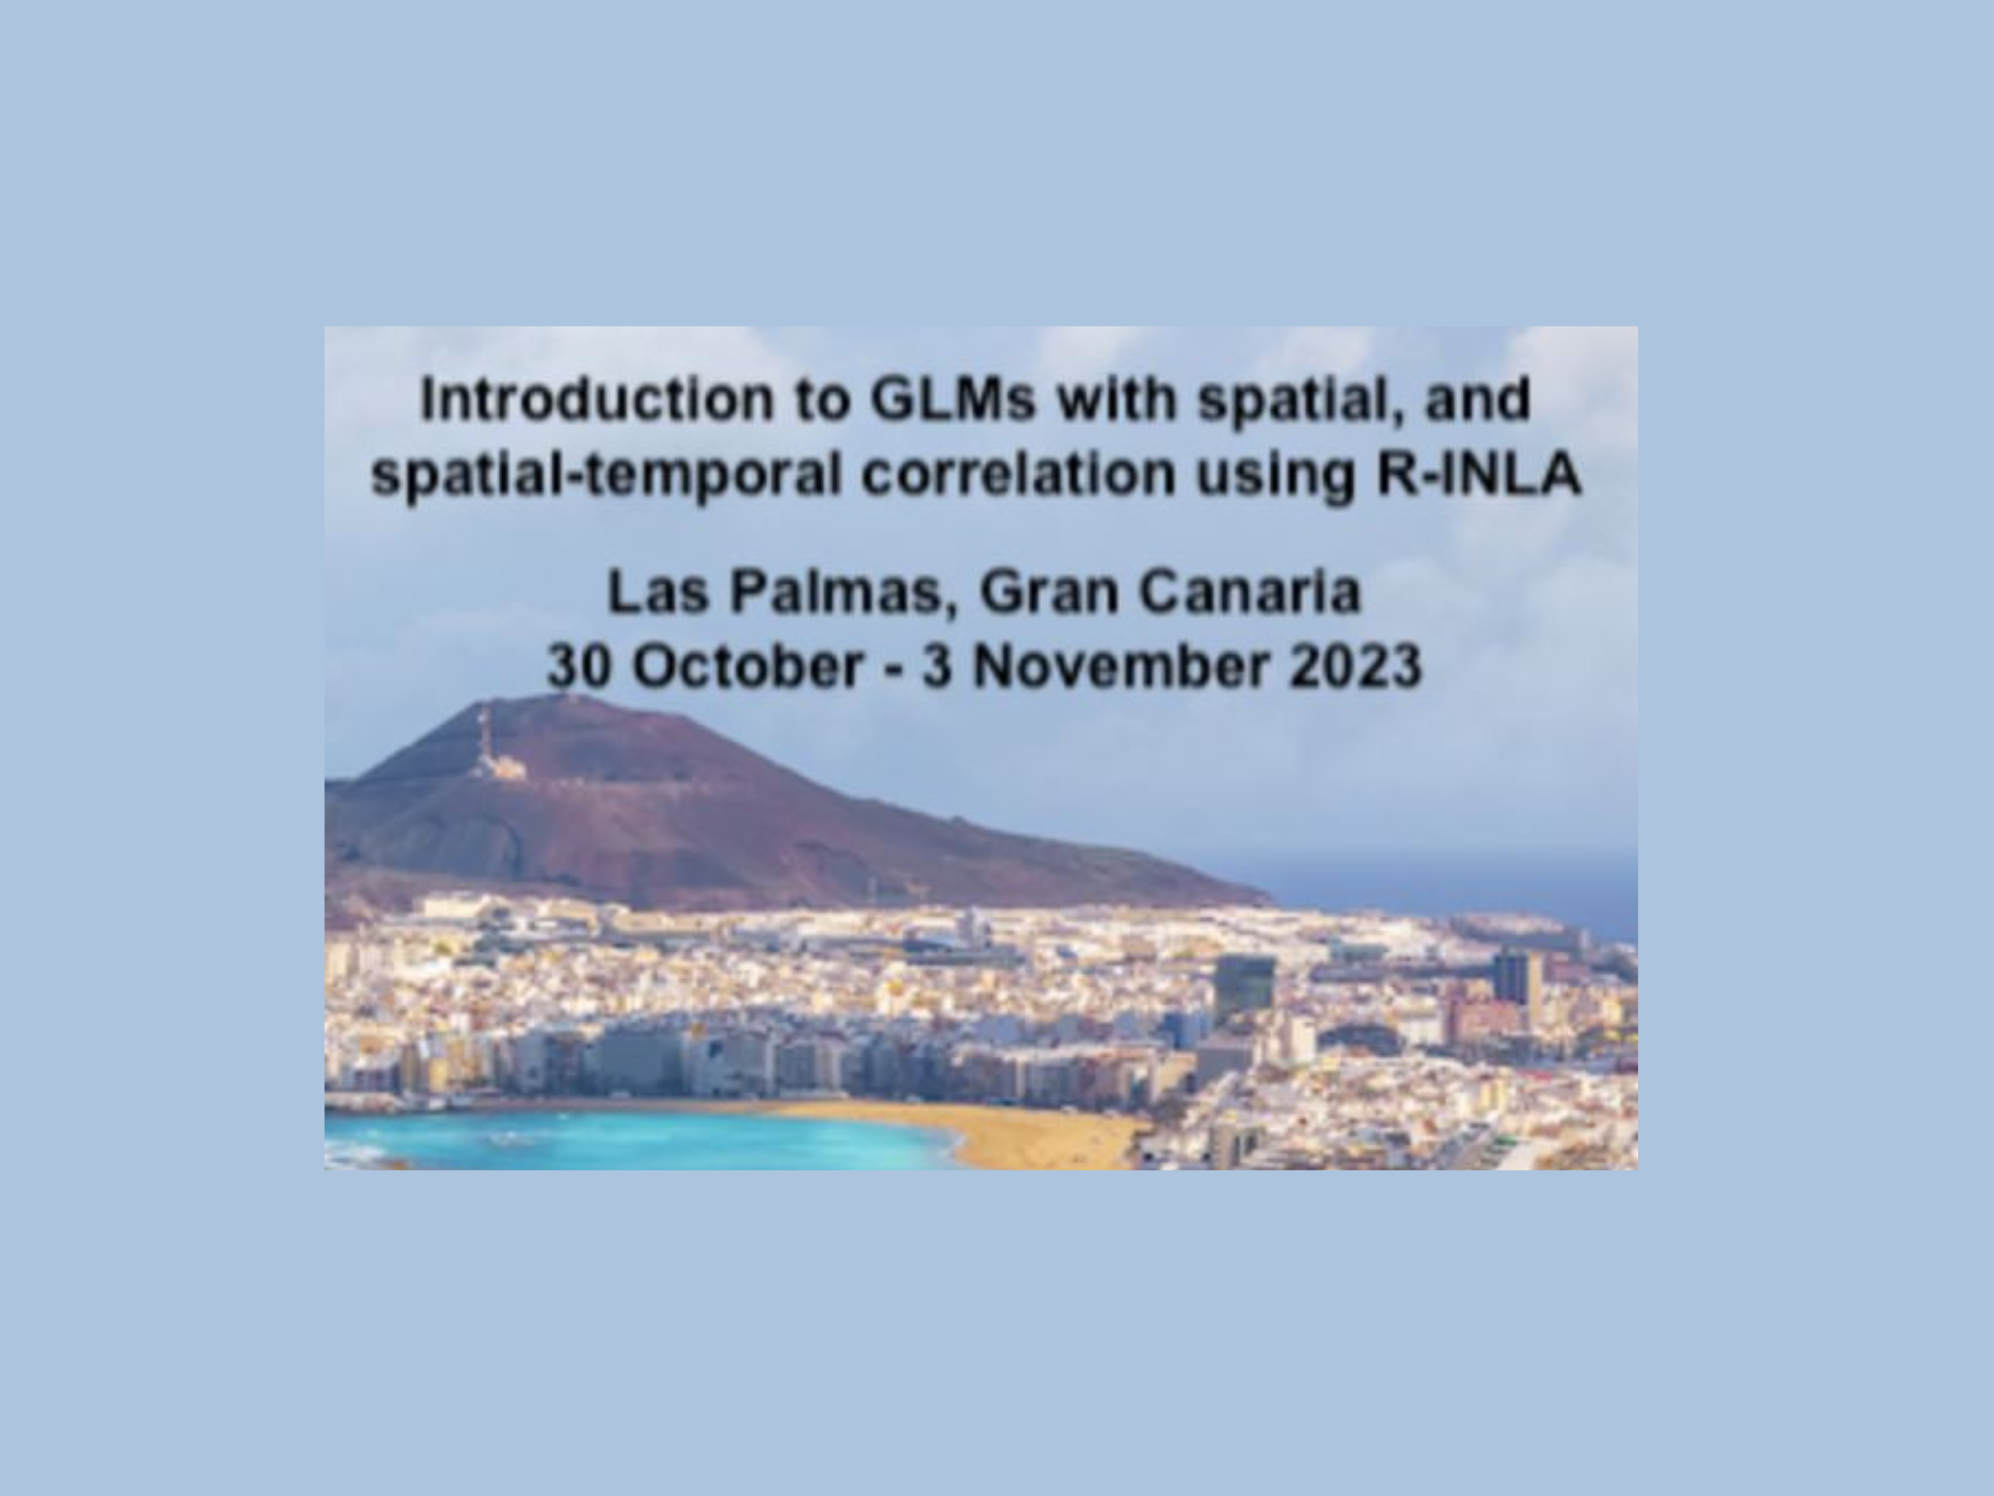 Course on Introduction to GLMs with spatial, and spatial-temporal correlation using R-INLA